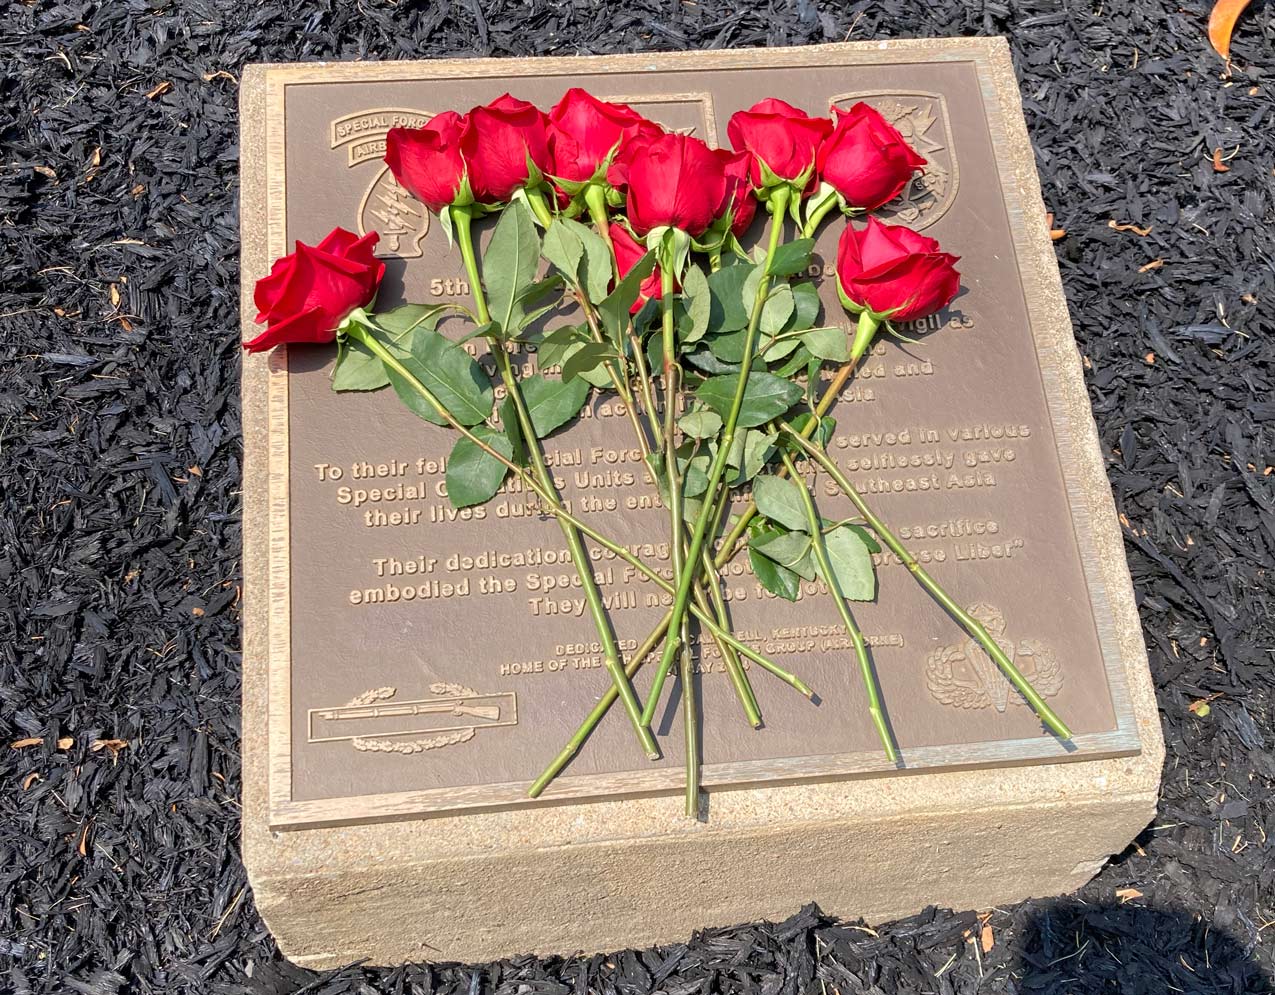 Roses were placed on the memorial by Sternberg, Godshall, and Meyer during the ceremony for the 5th SFG Vietnam Memorial.